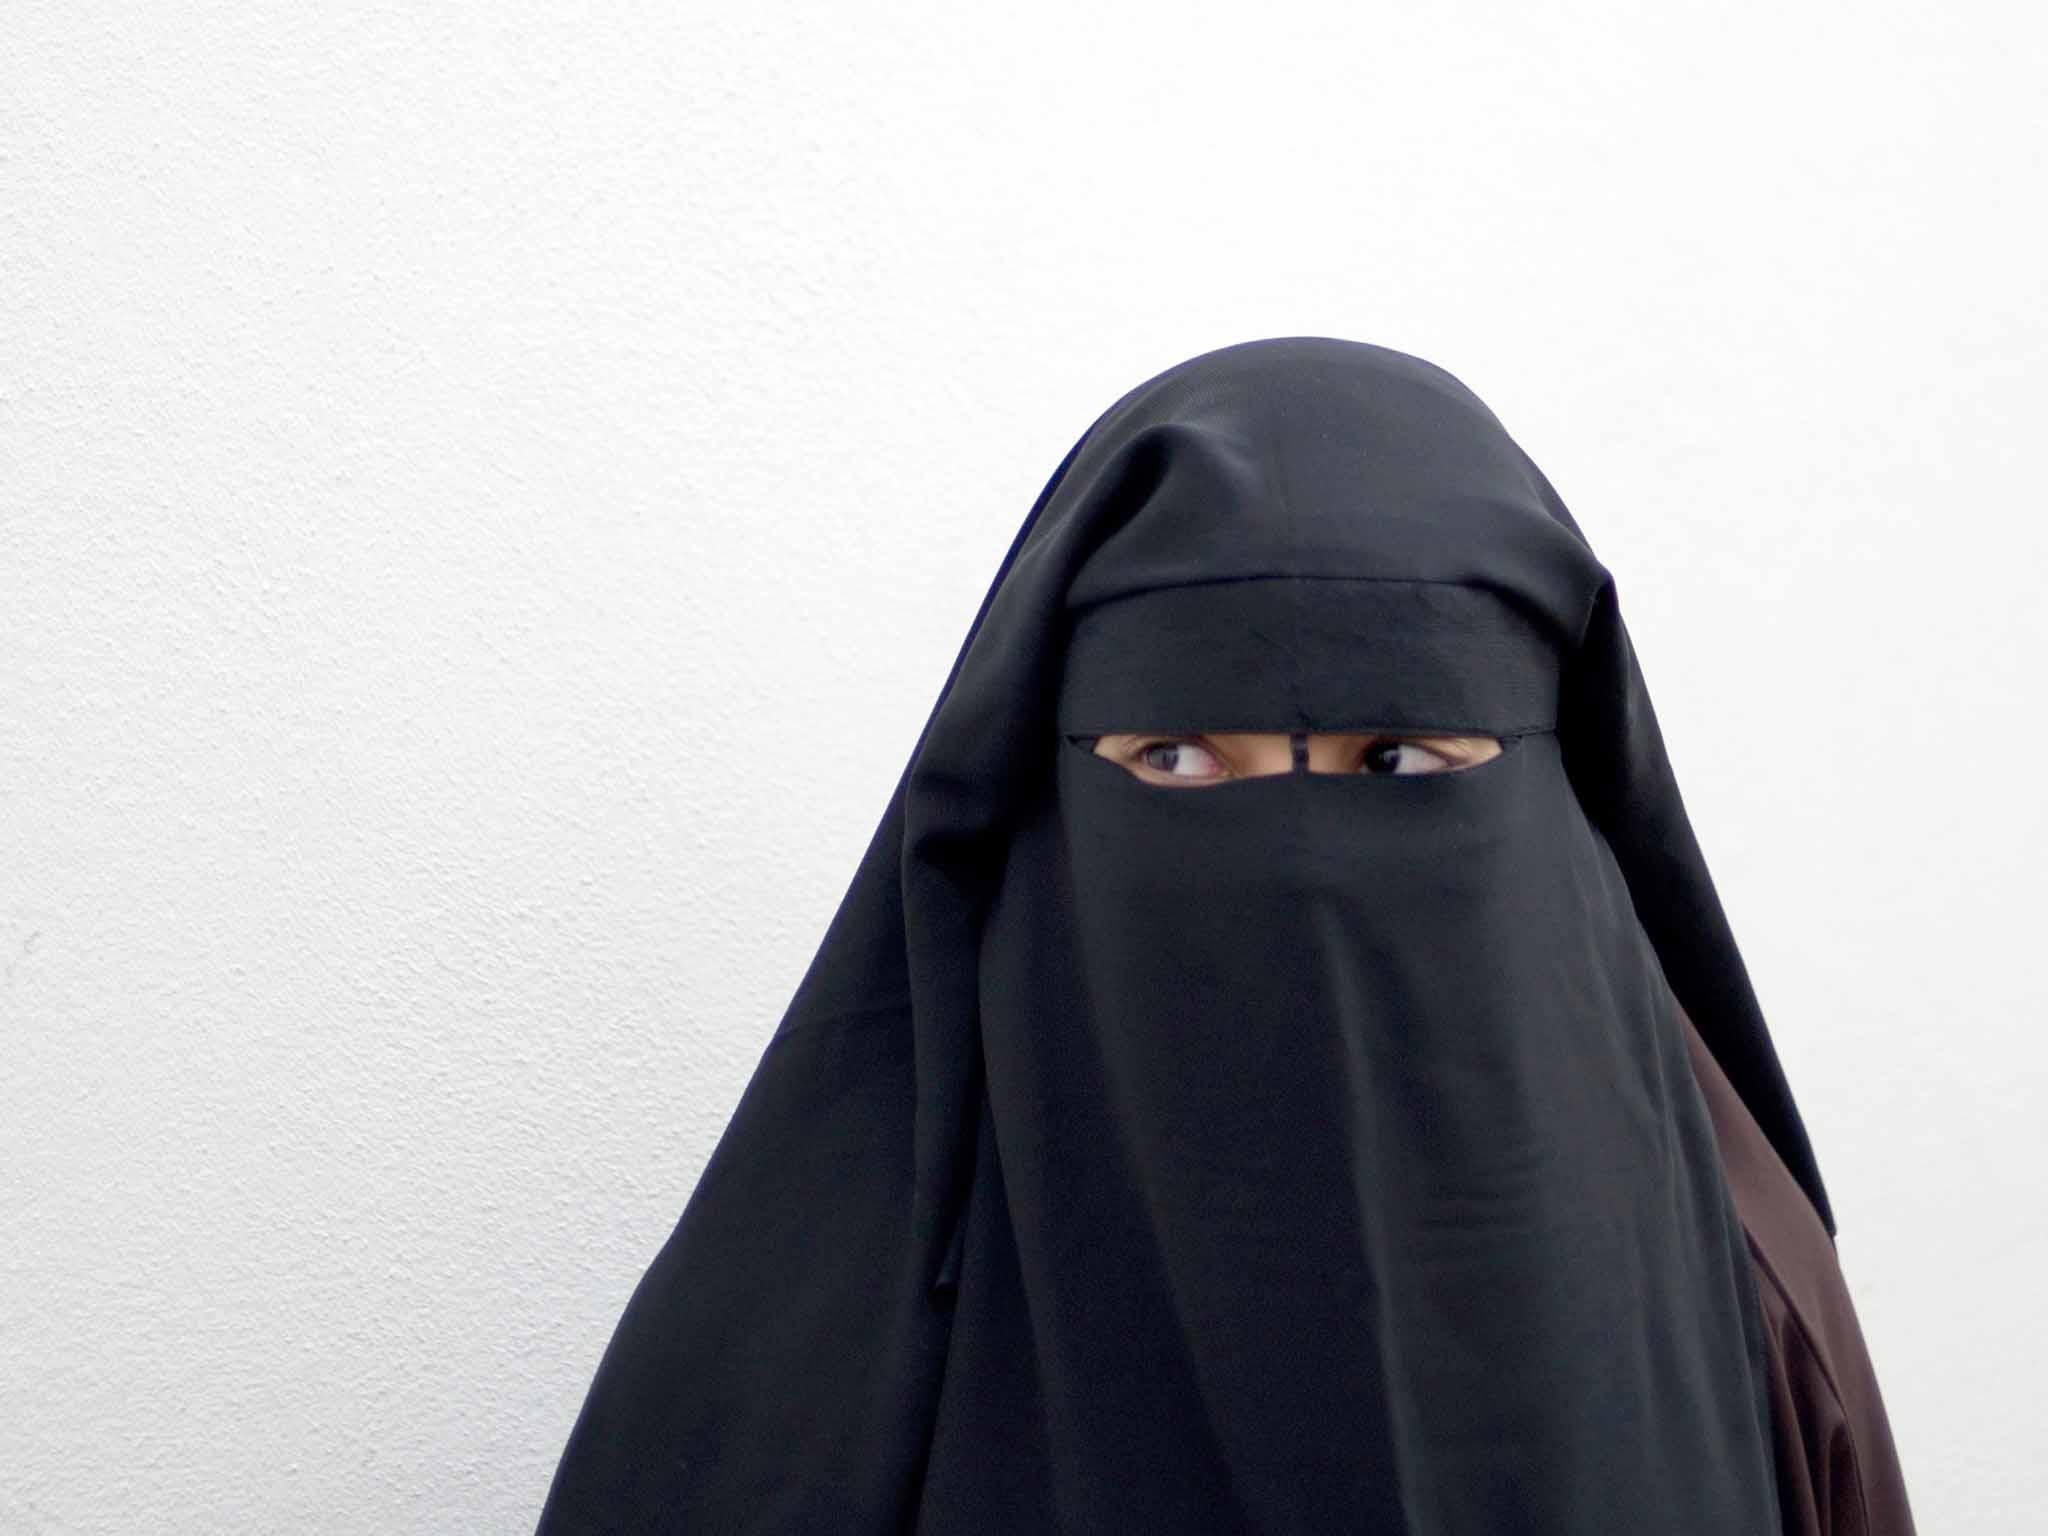 A Muslim woman wearing a niqab poses in Montreuil, outside Paris, France (File photo)